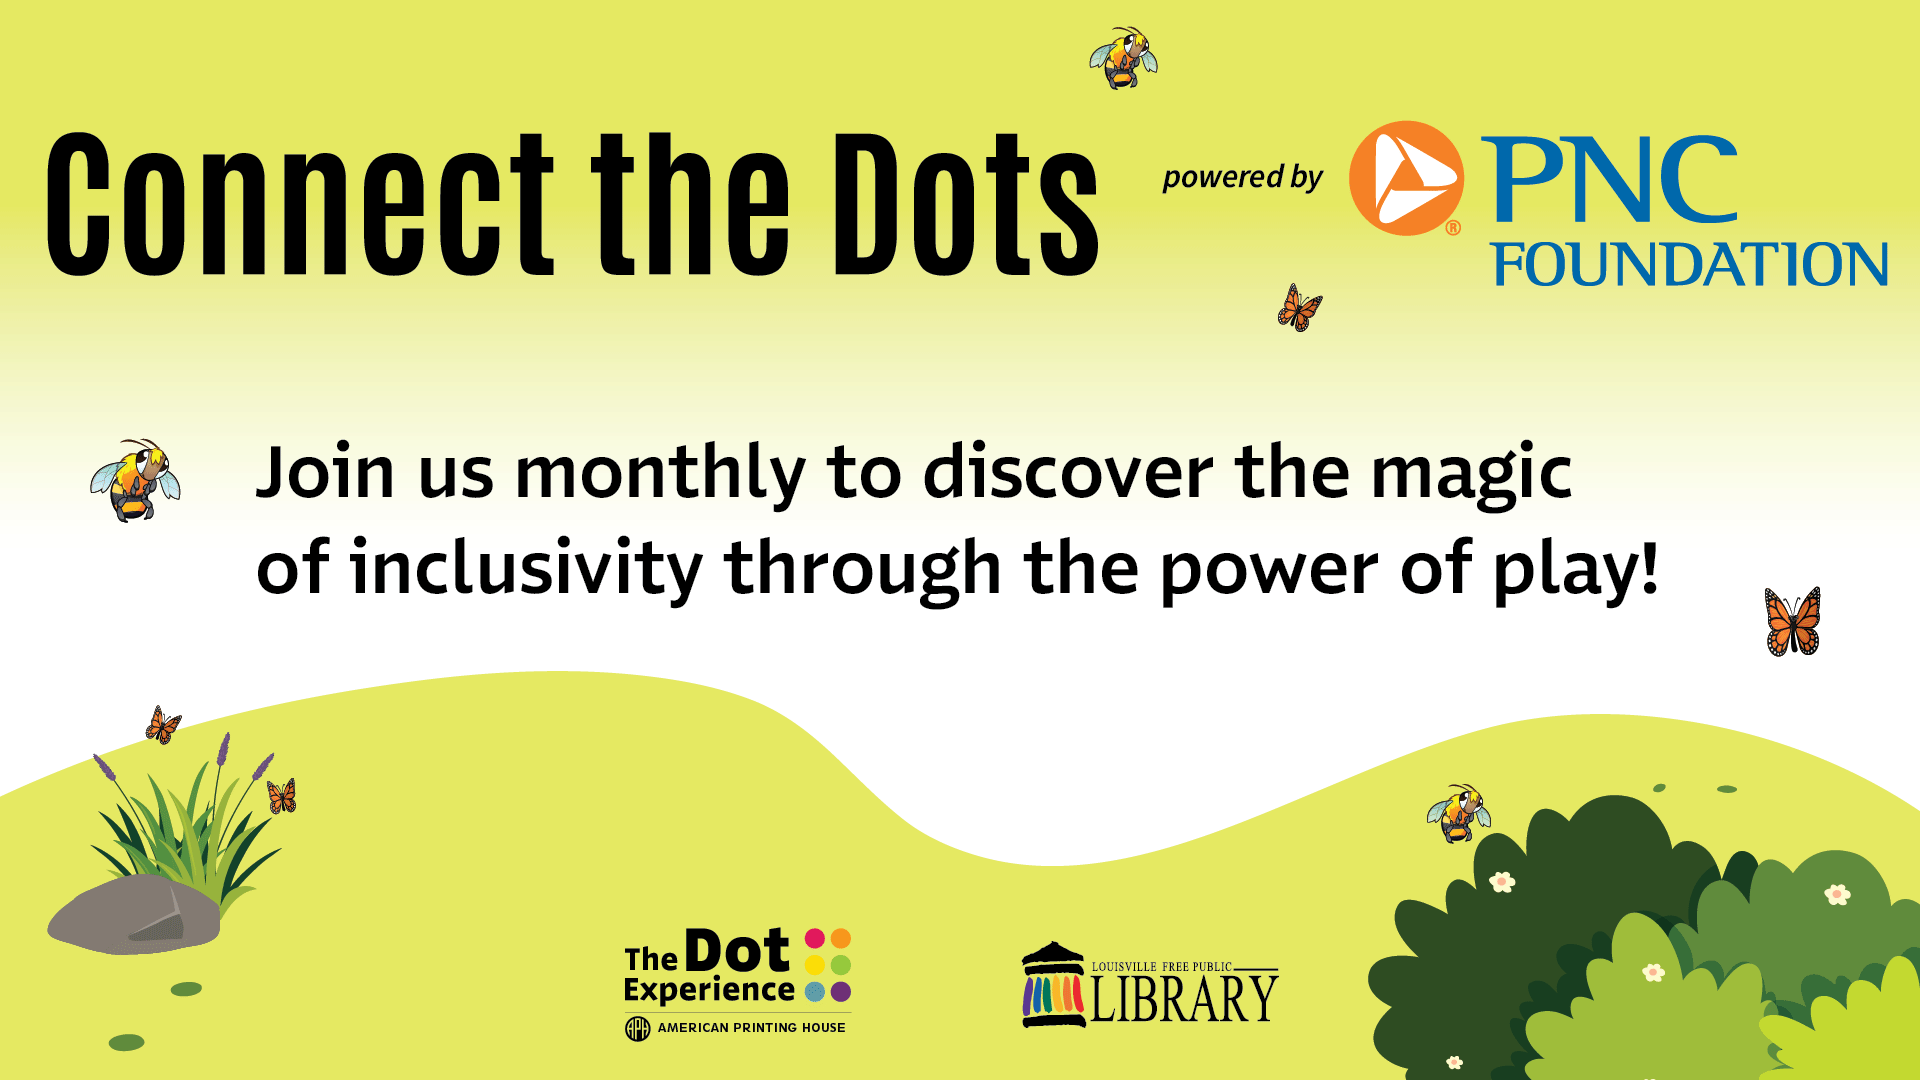 Illustration with green plants, bees, butterflies and logos of: The PNC Foundation, The Dot Experience, and Louisville Free Public Library. Includes the following text: Connect the Dots powered by PNC Foundation. Join us monthly to discover the magic of inclusivity through the power of play!